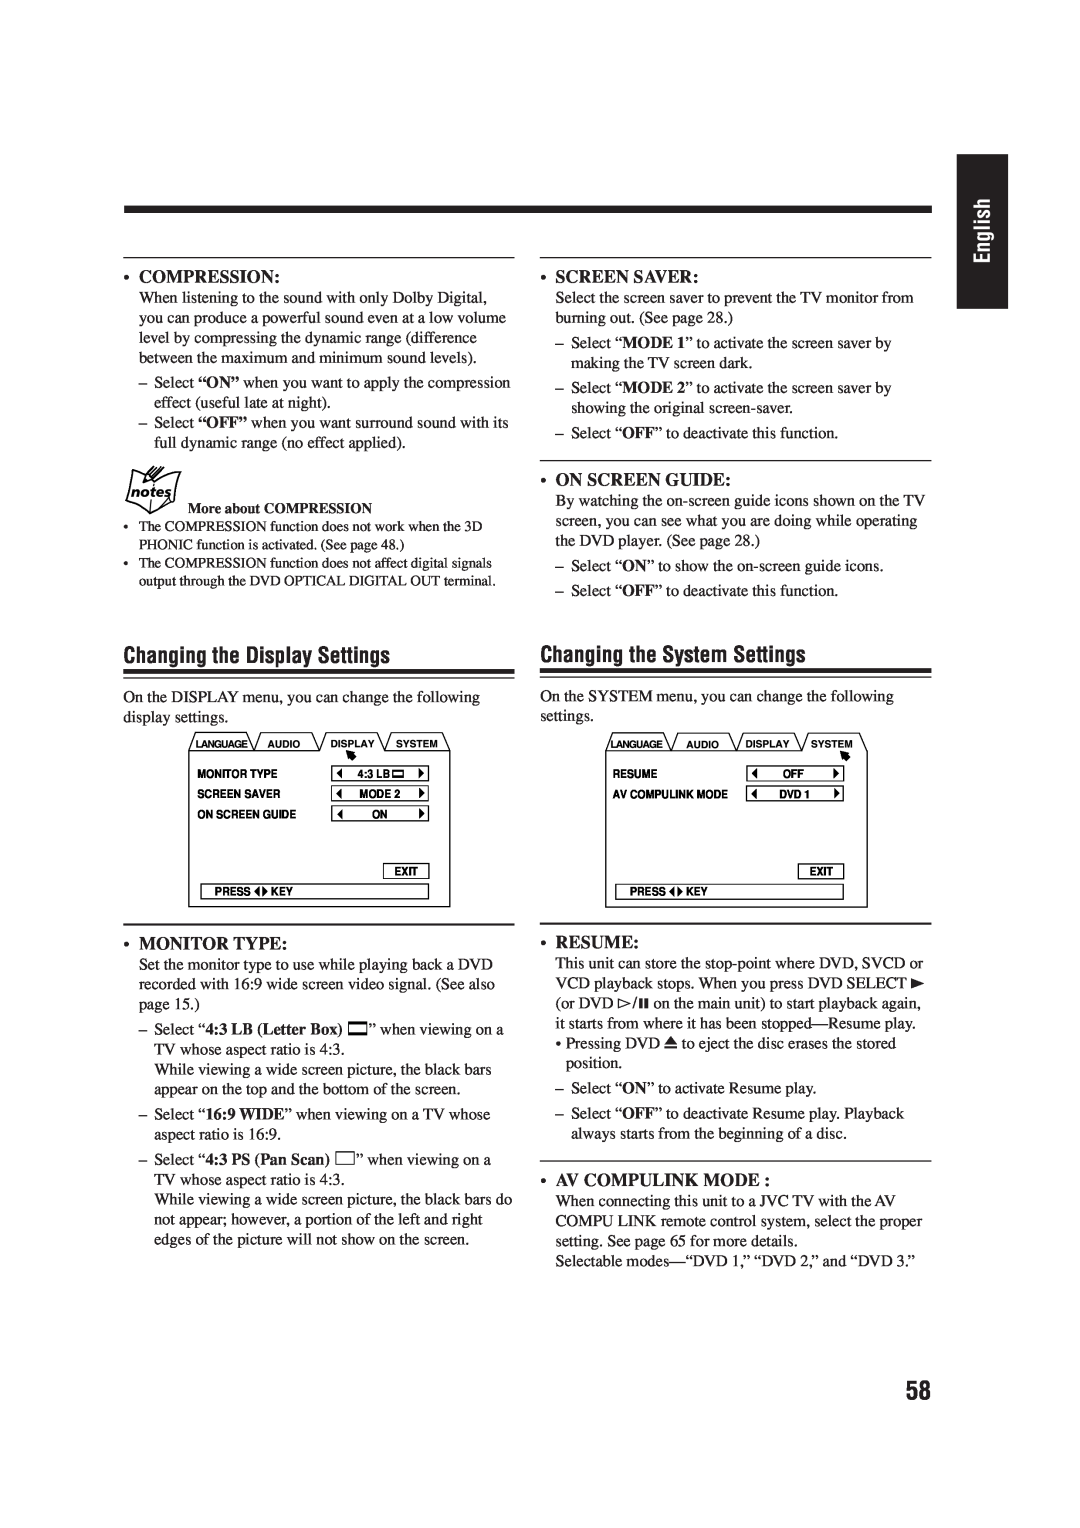 JVC LVT0954-007A Changing the Display Settings, Changing the System Settings, English, Compression, Screen Saver, Resume 